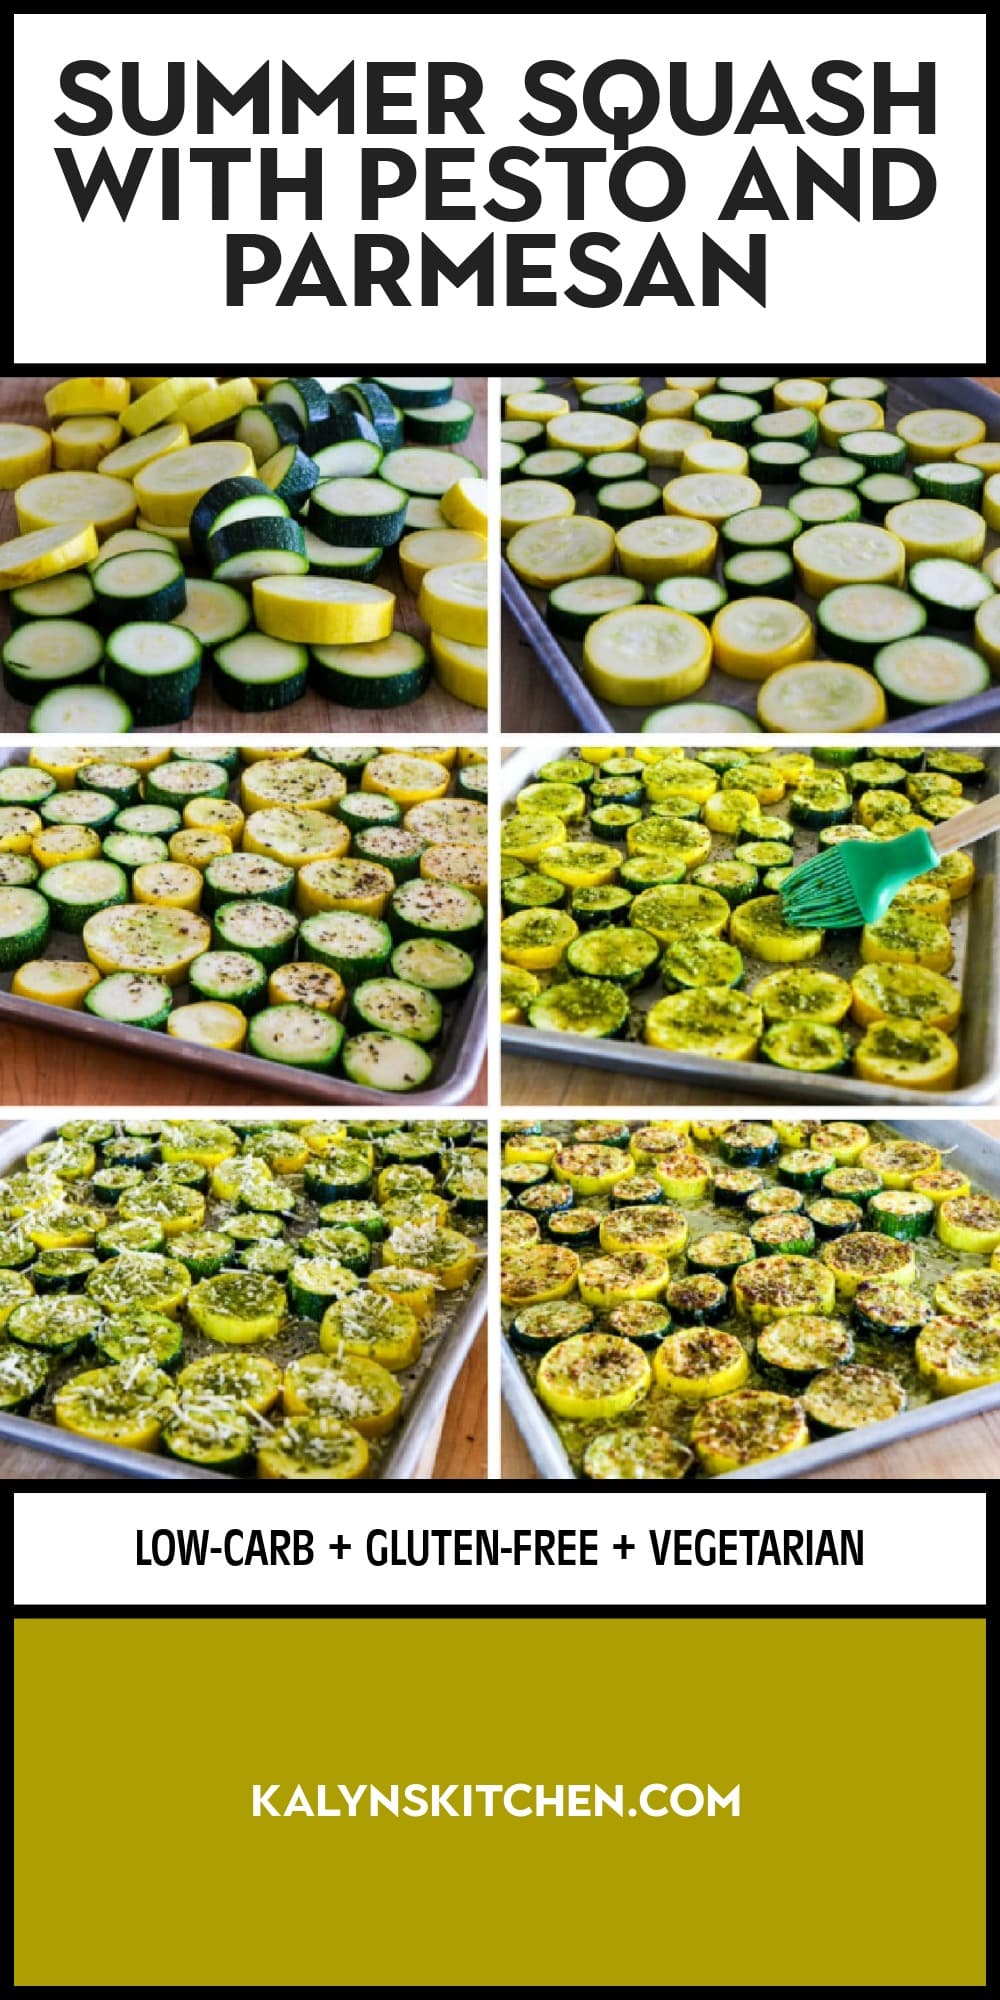 Pinterest image of Summer Squash with Pesto and Parmesan